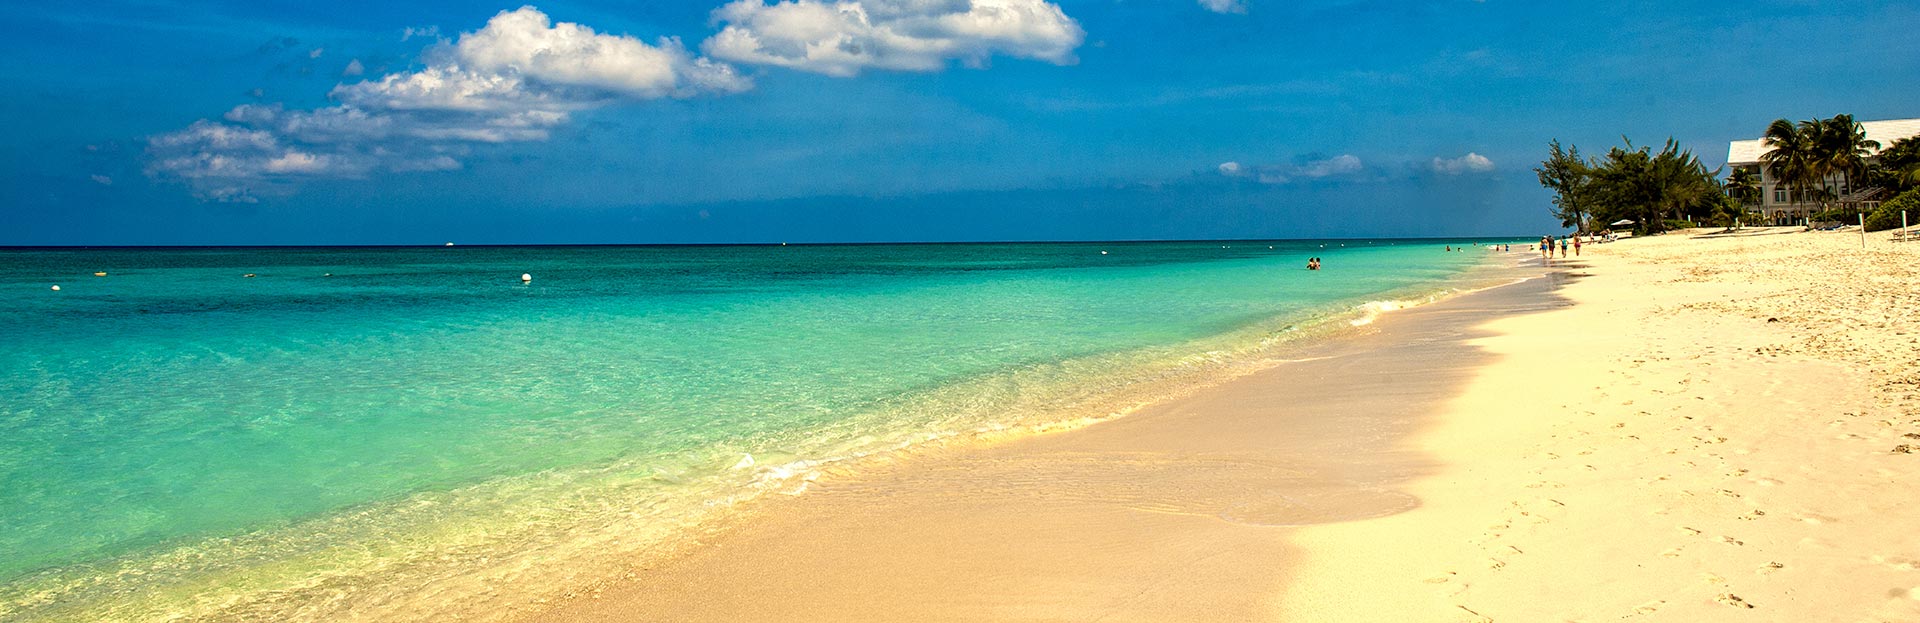 Grand Cayman Vacations | Packages from Canada - tripcentral.ca